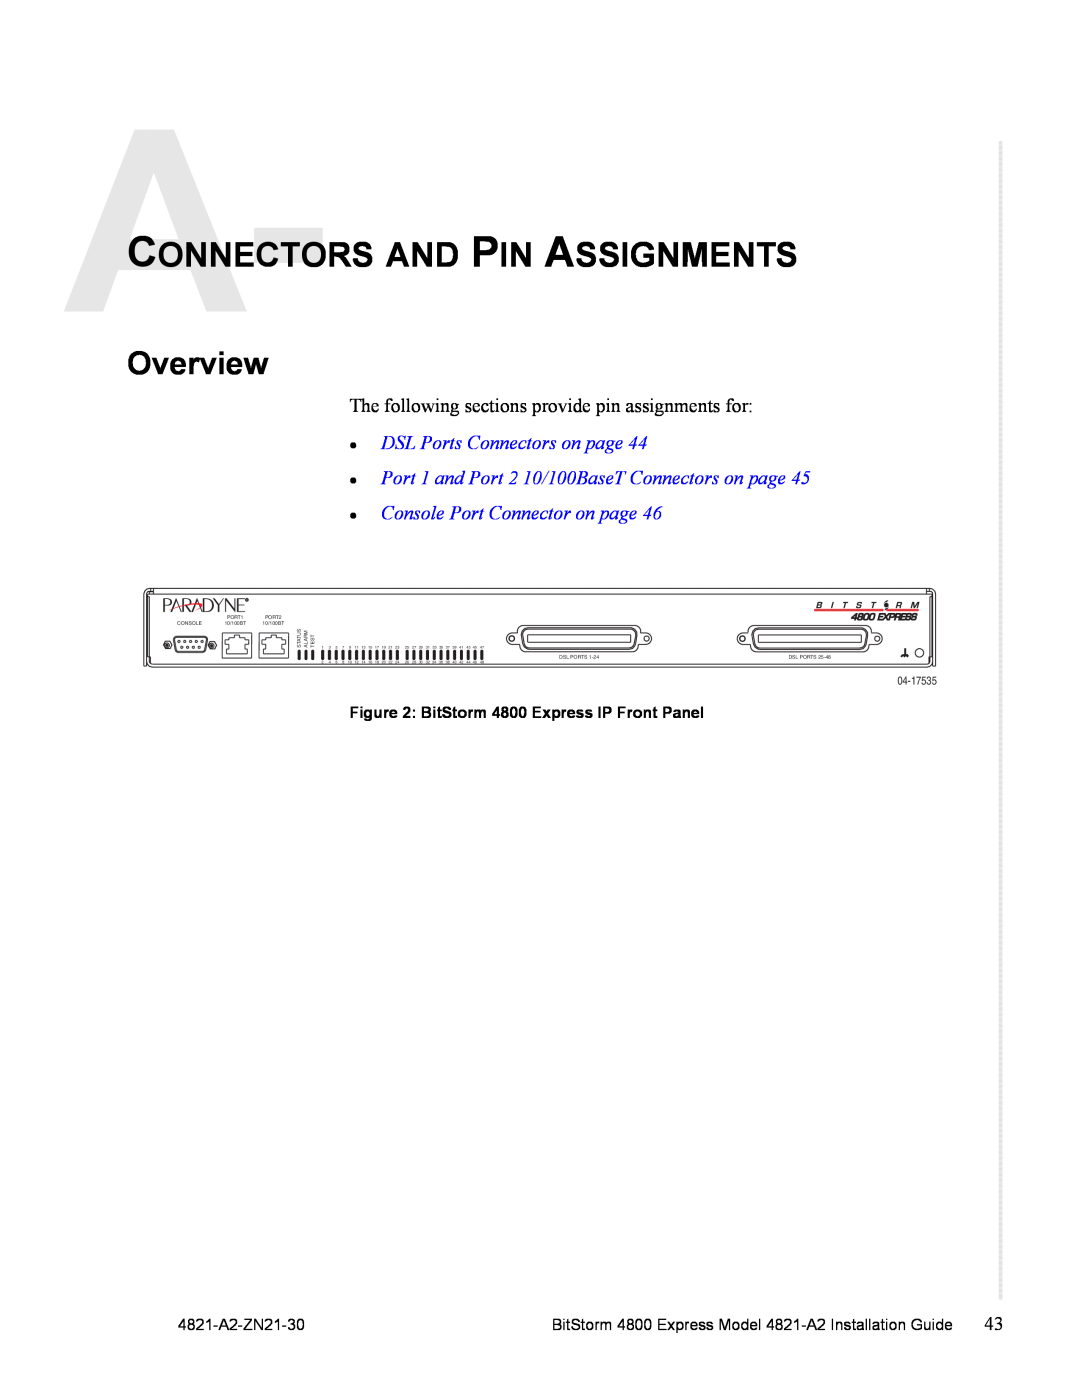 Zhone Technologies Connectors And Pin Assignments, Overview, z DSL Ports Connectors on page, 4821-A2-ZN21-30, 04-17535 